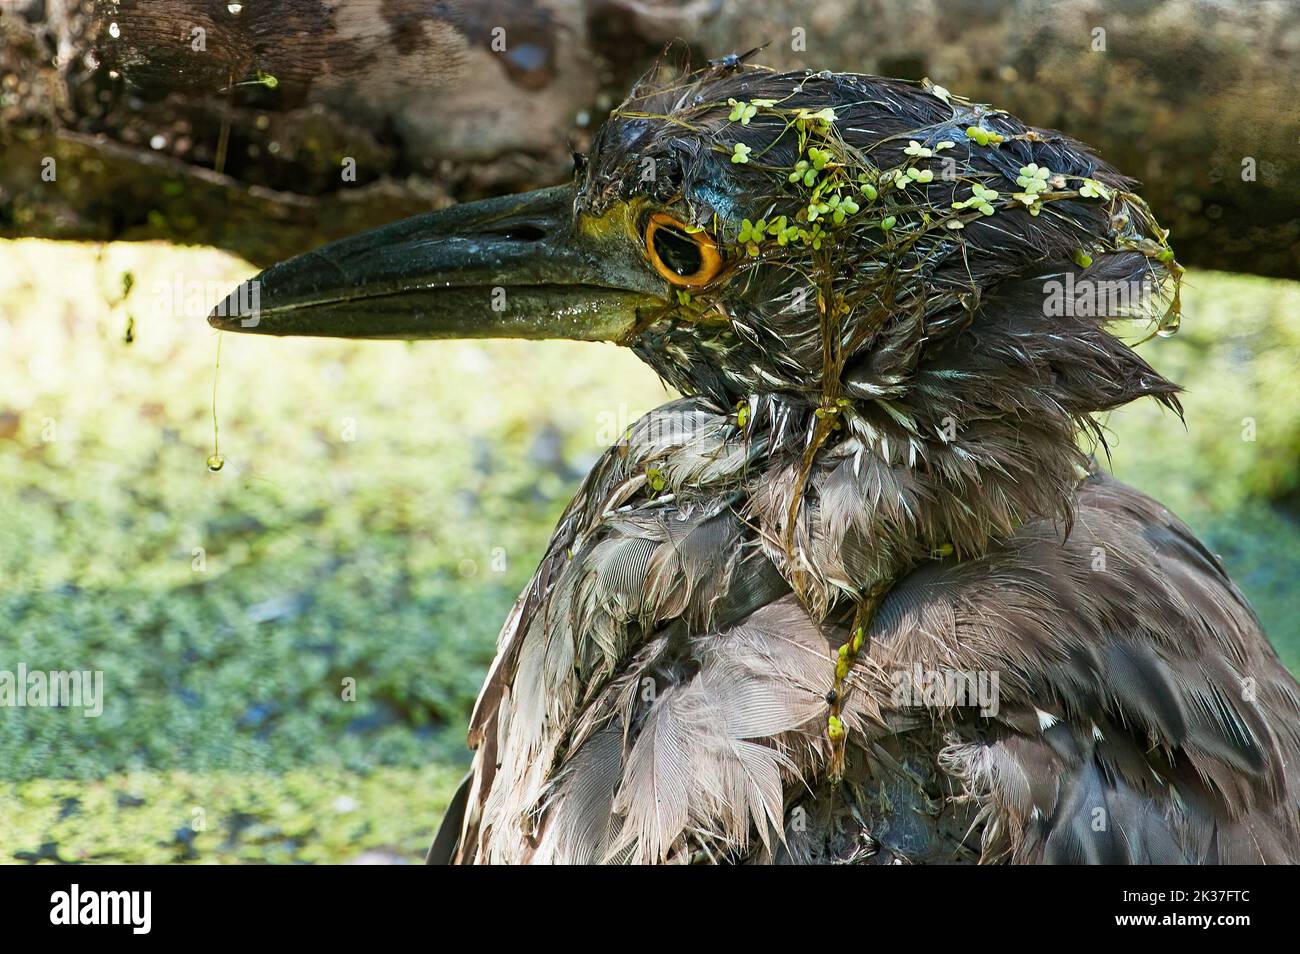 Juvenile yellow-crowned night heron covered in duckweed Stock Photo